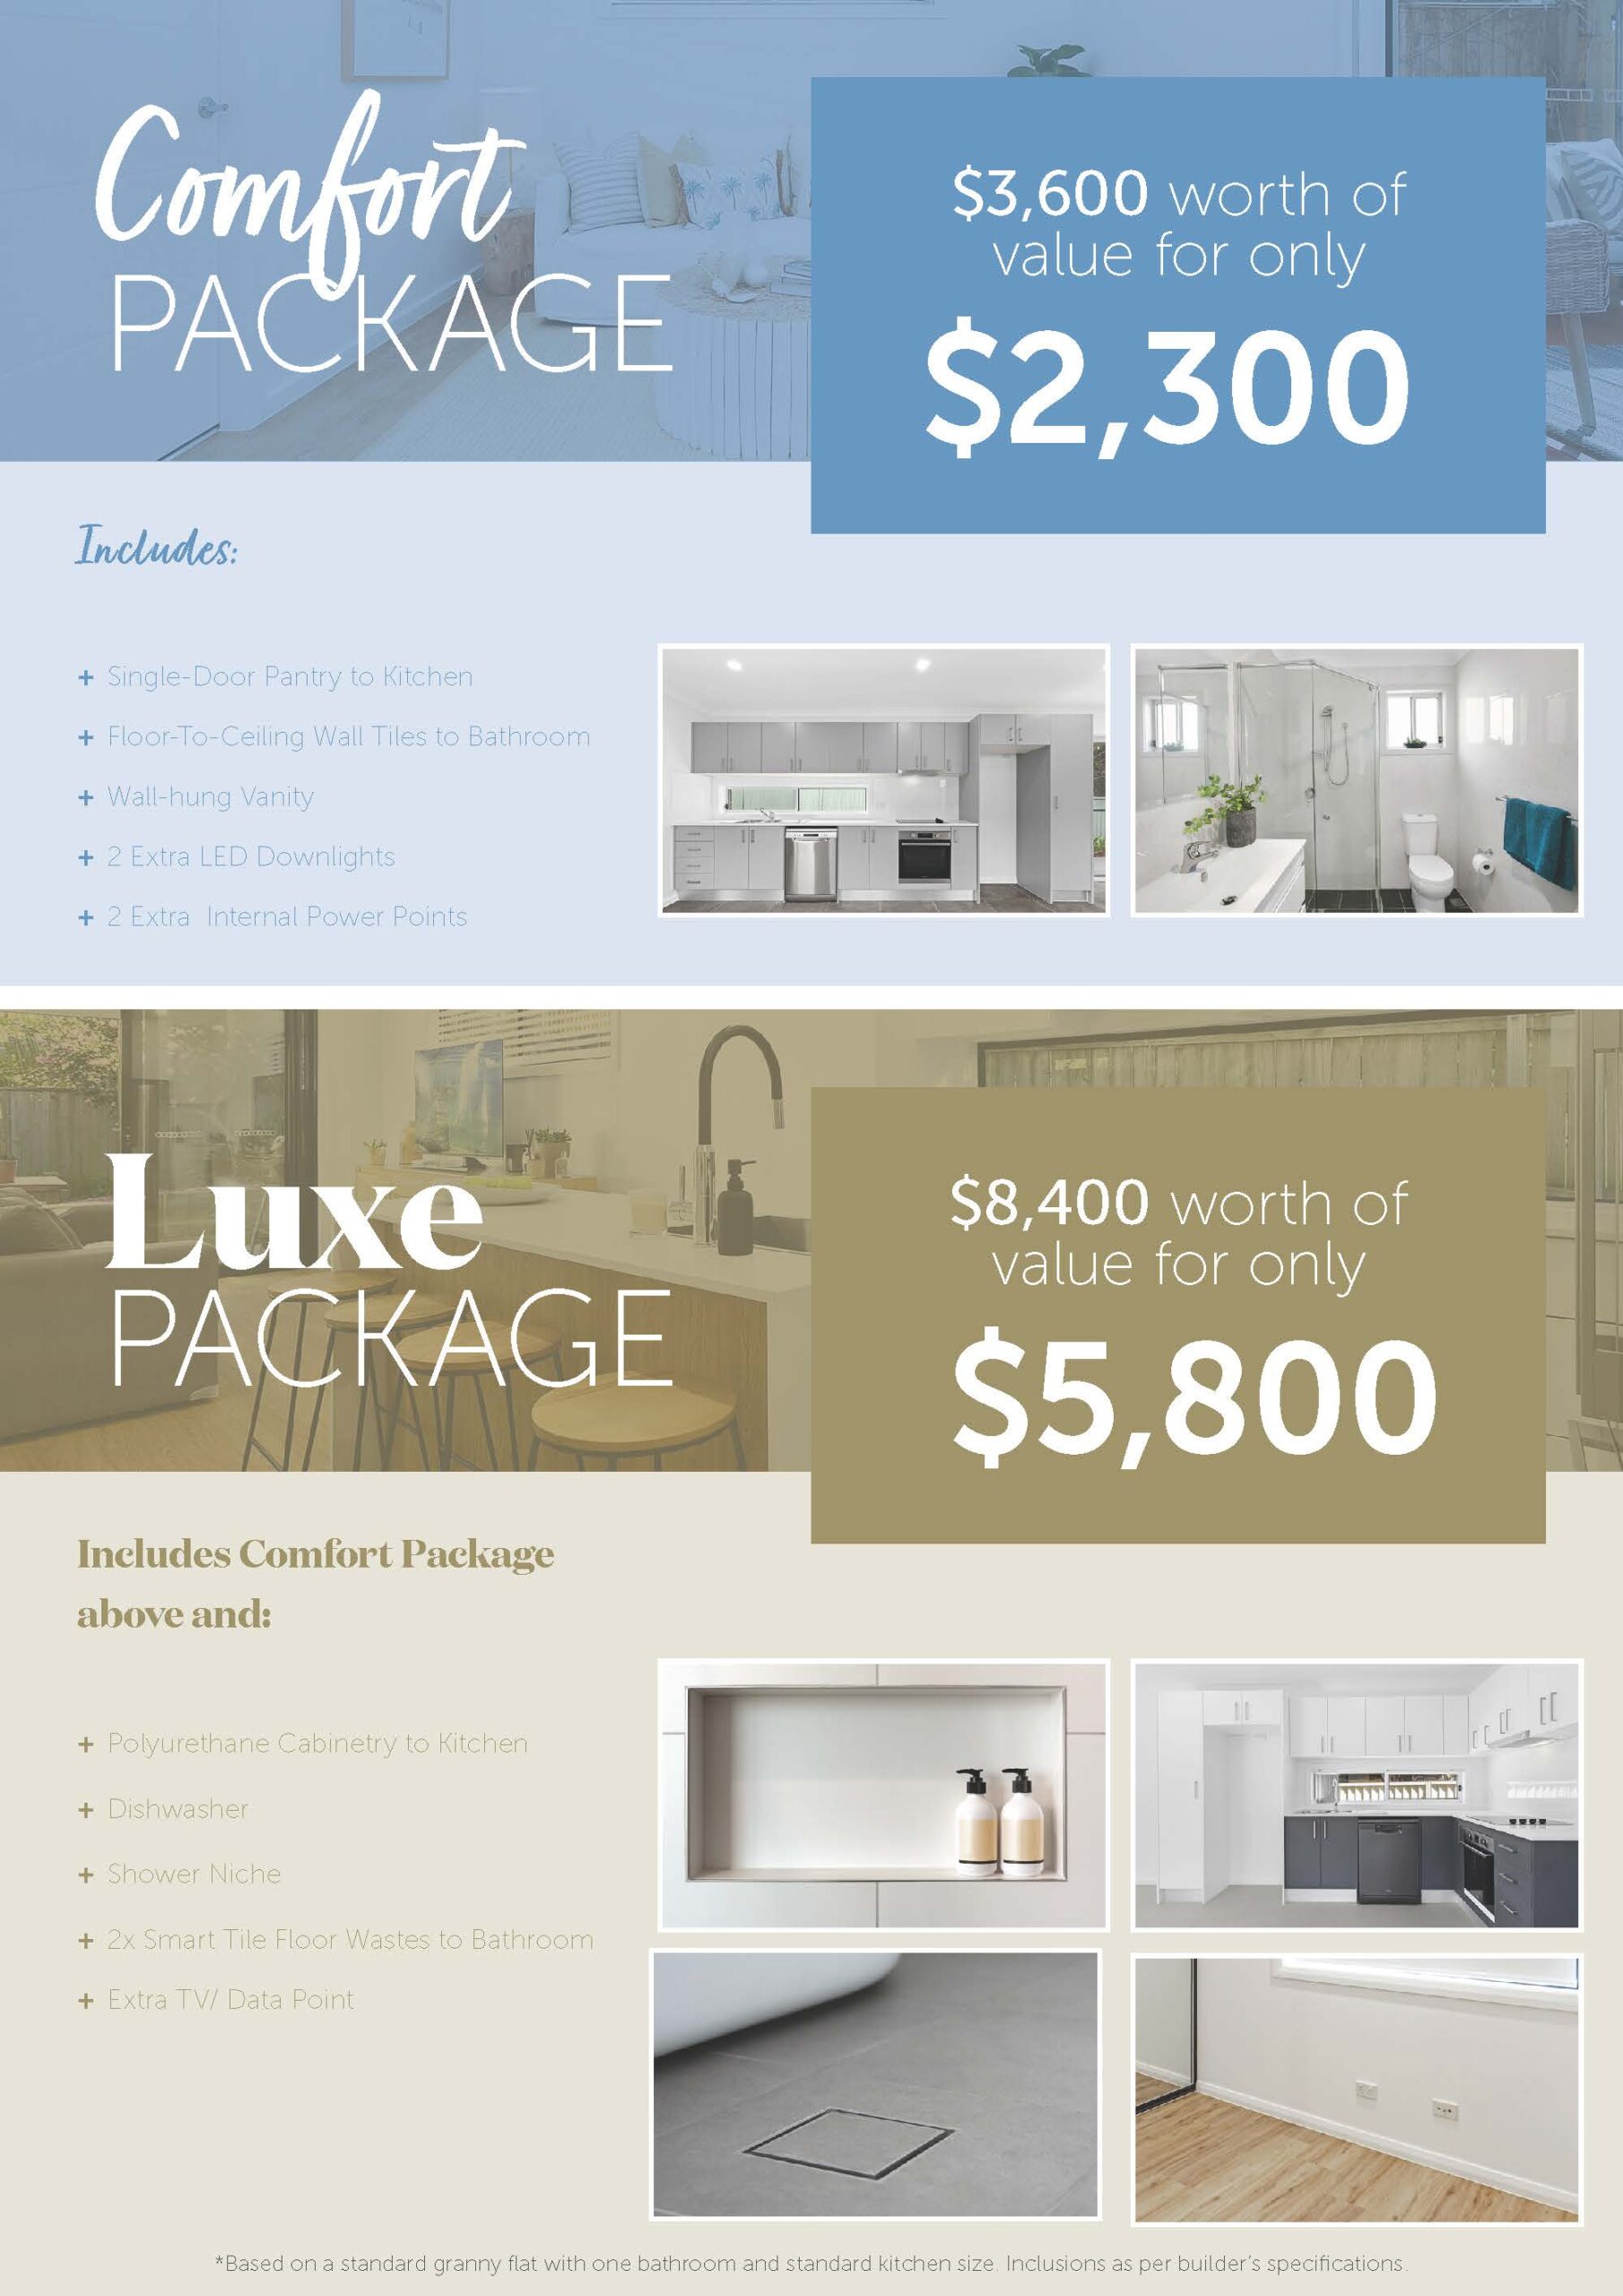 Comfort & Luxe Upgrades Packages